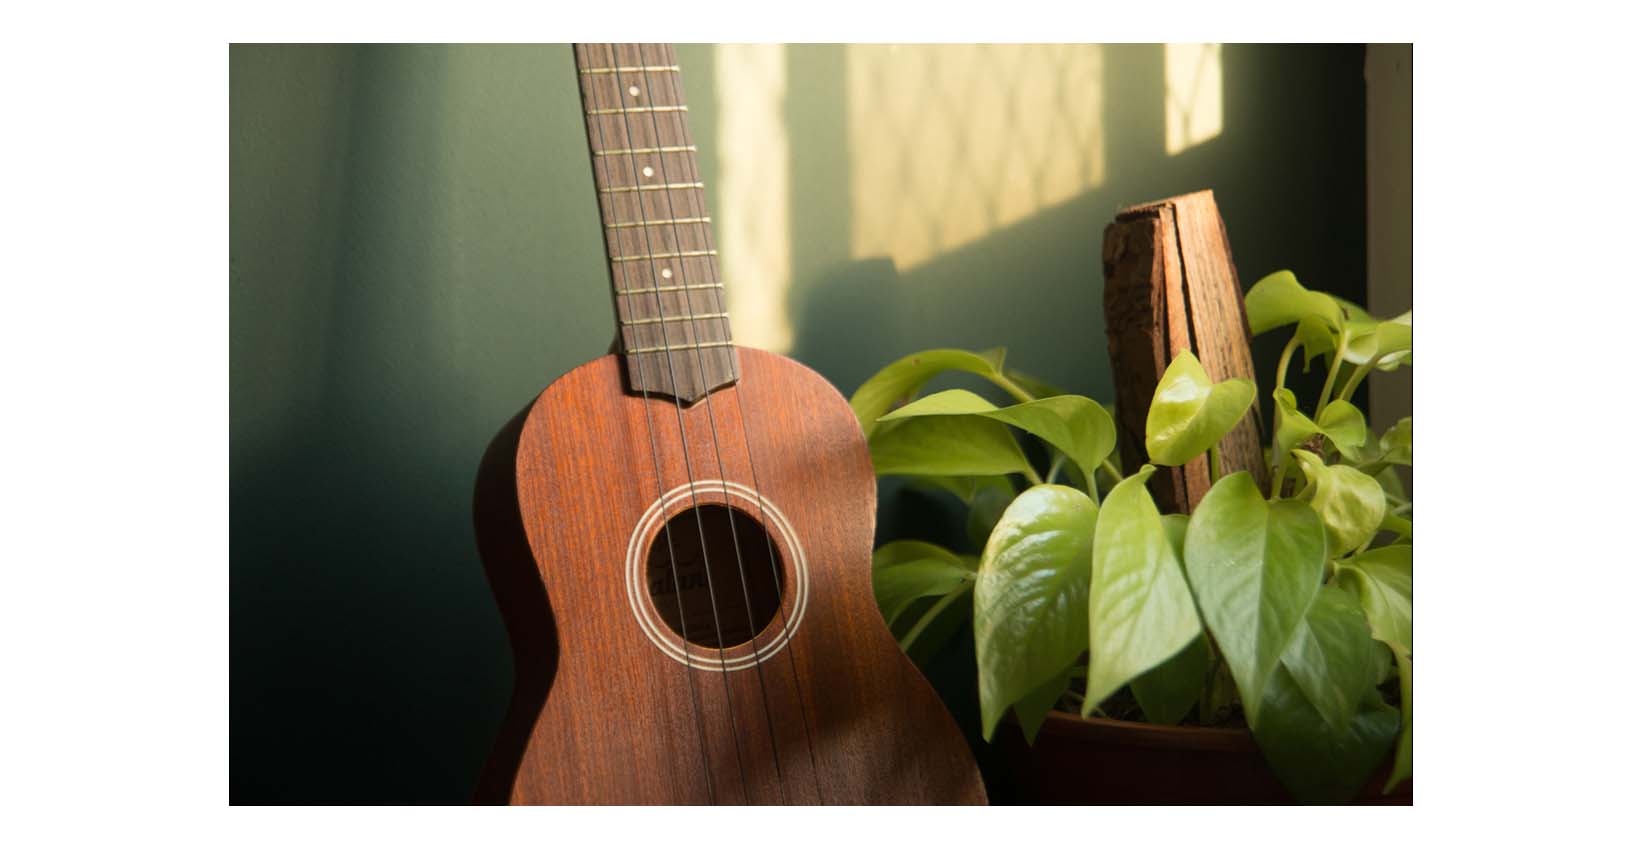 guitar next to some plants